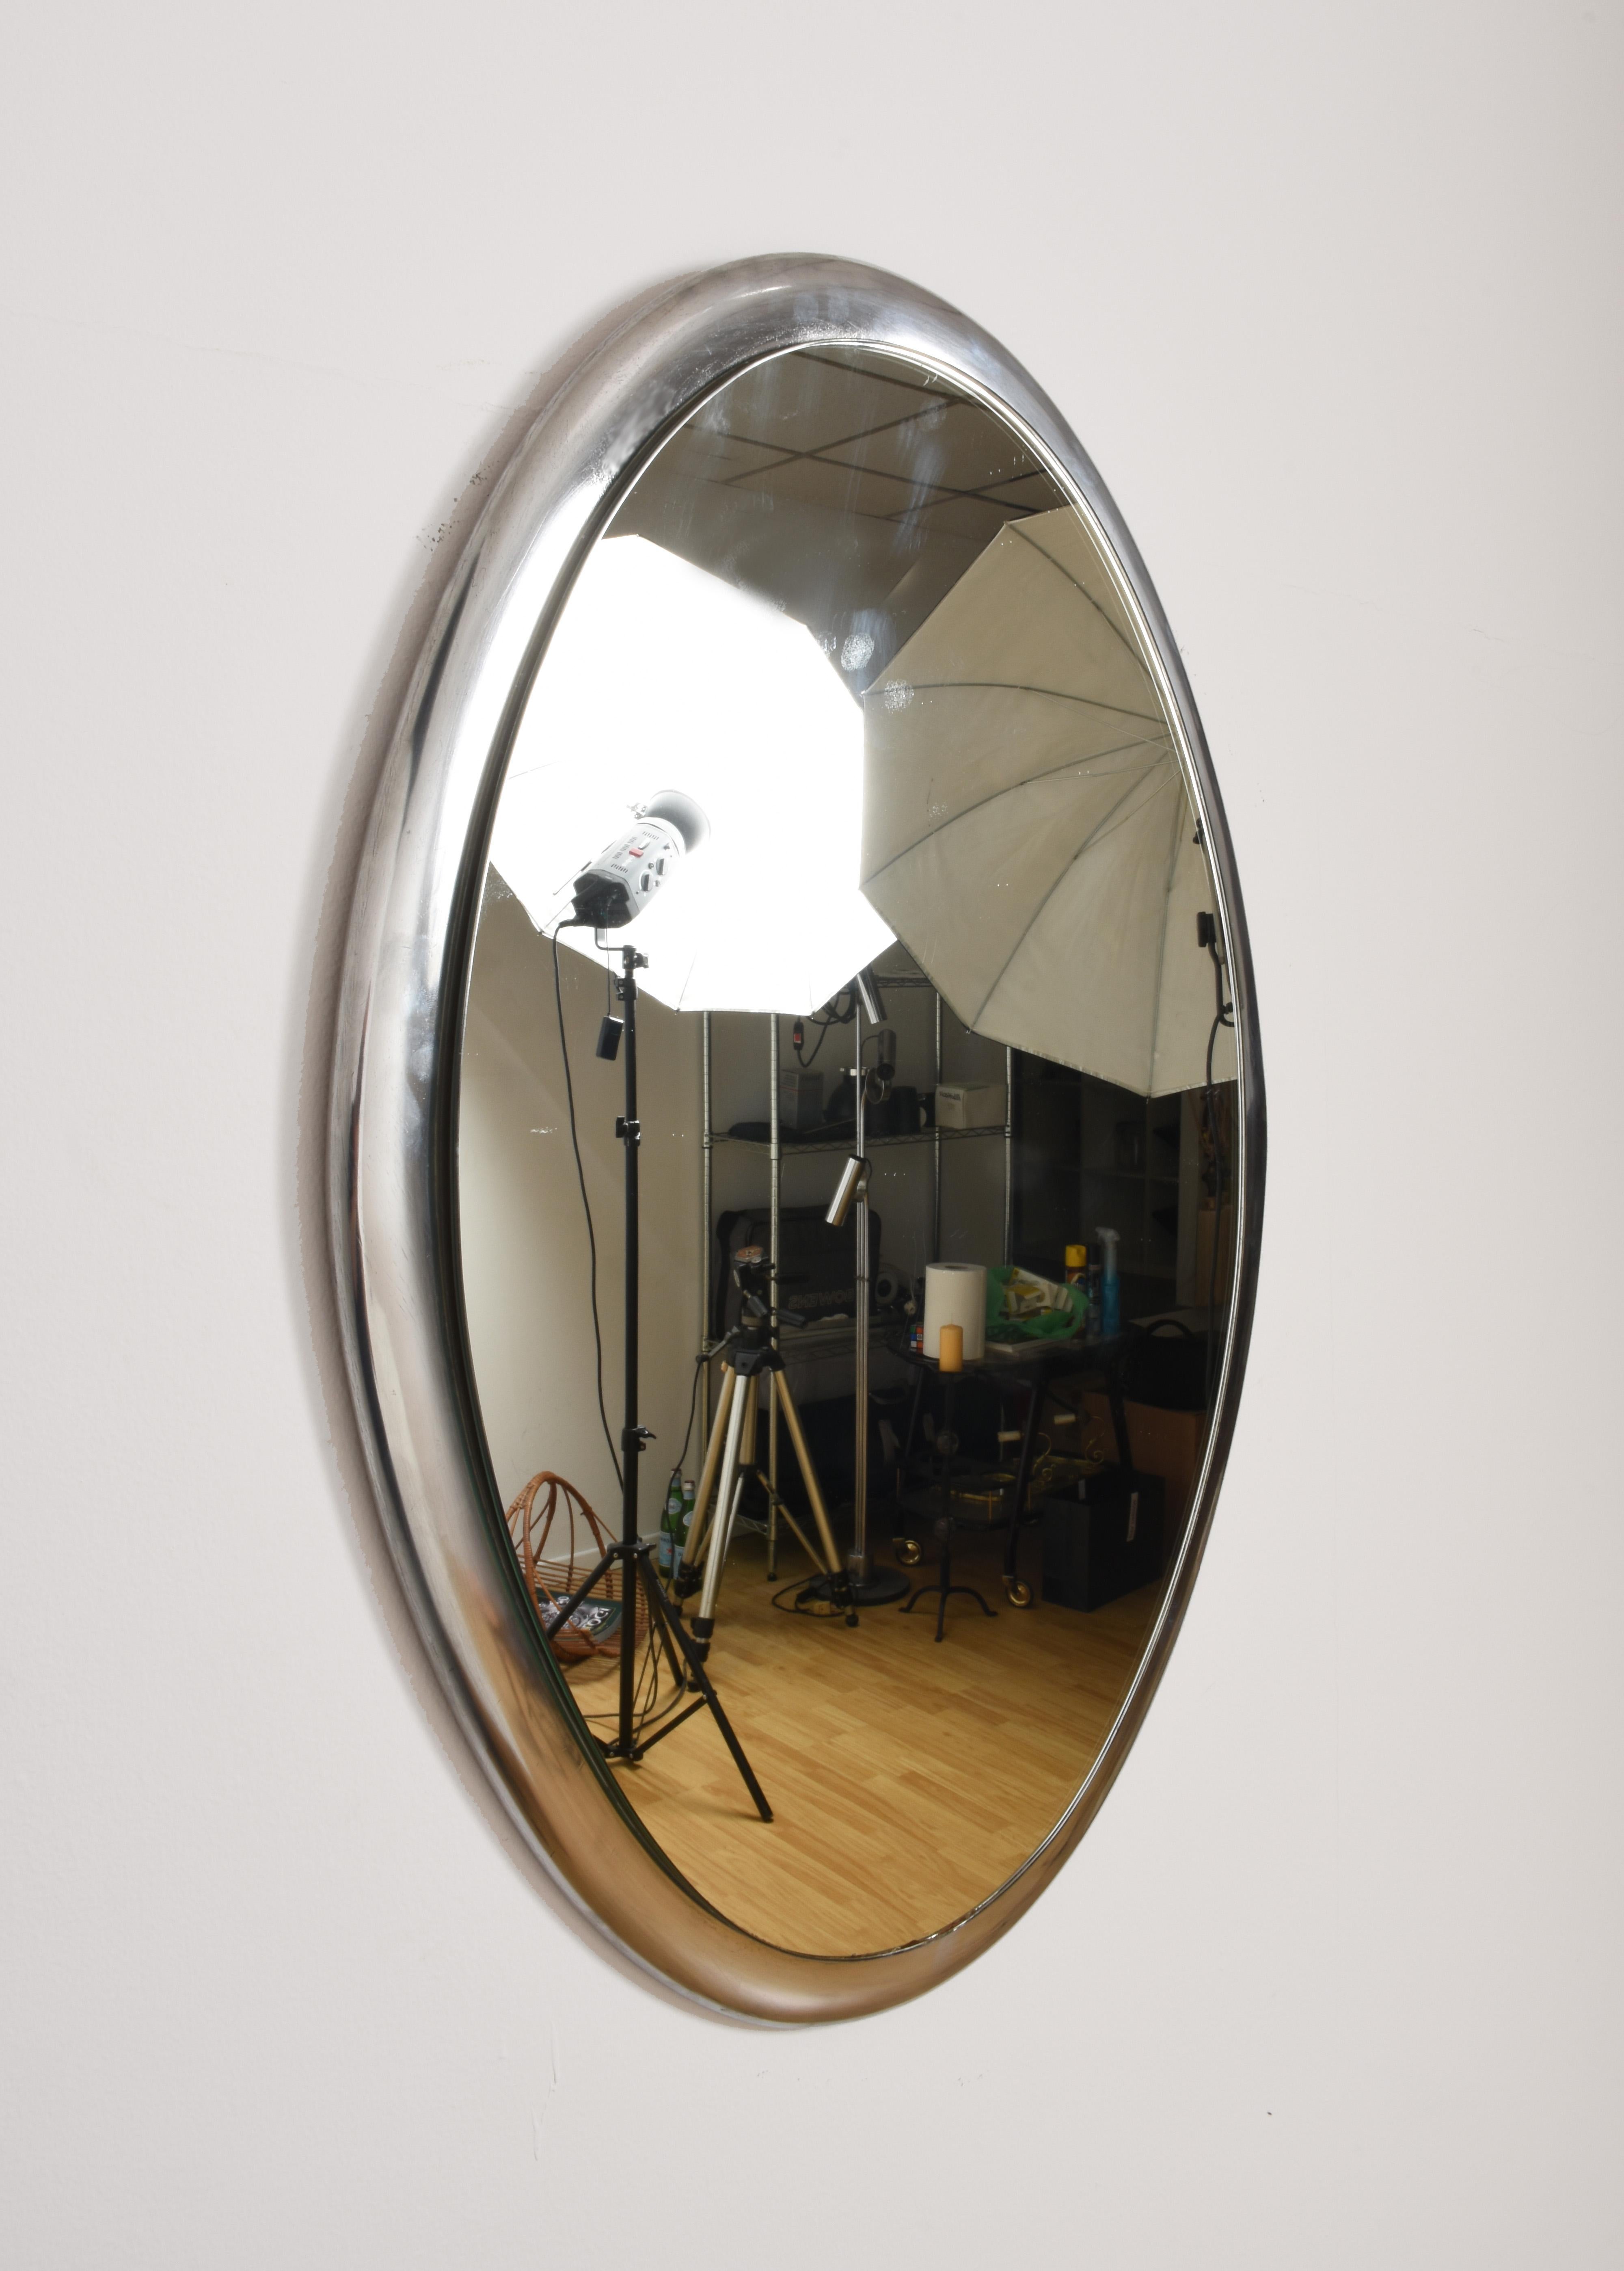 Oval-shaped mirror, the frame is very heavy metal (it could be cobalt). The mirror is in relief and this gives a deeper effect. It can be mounted either vertically or horizontally.